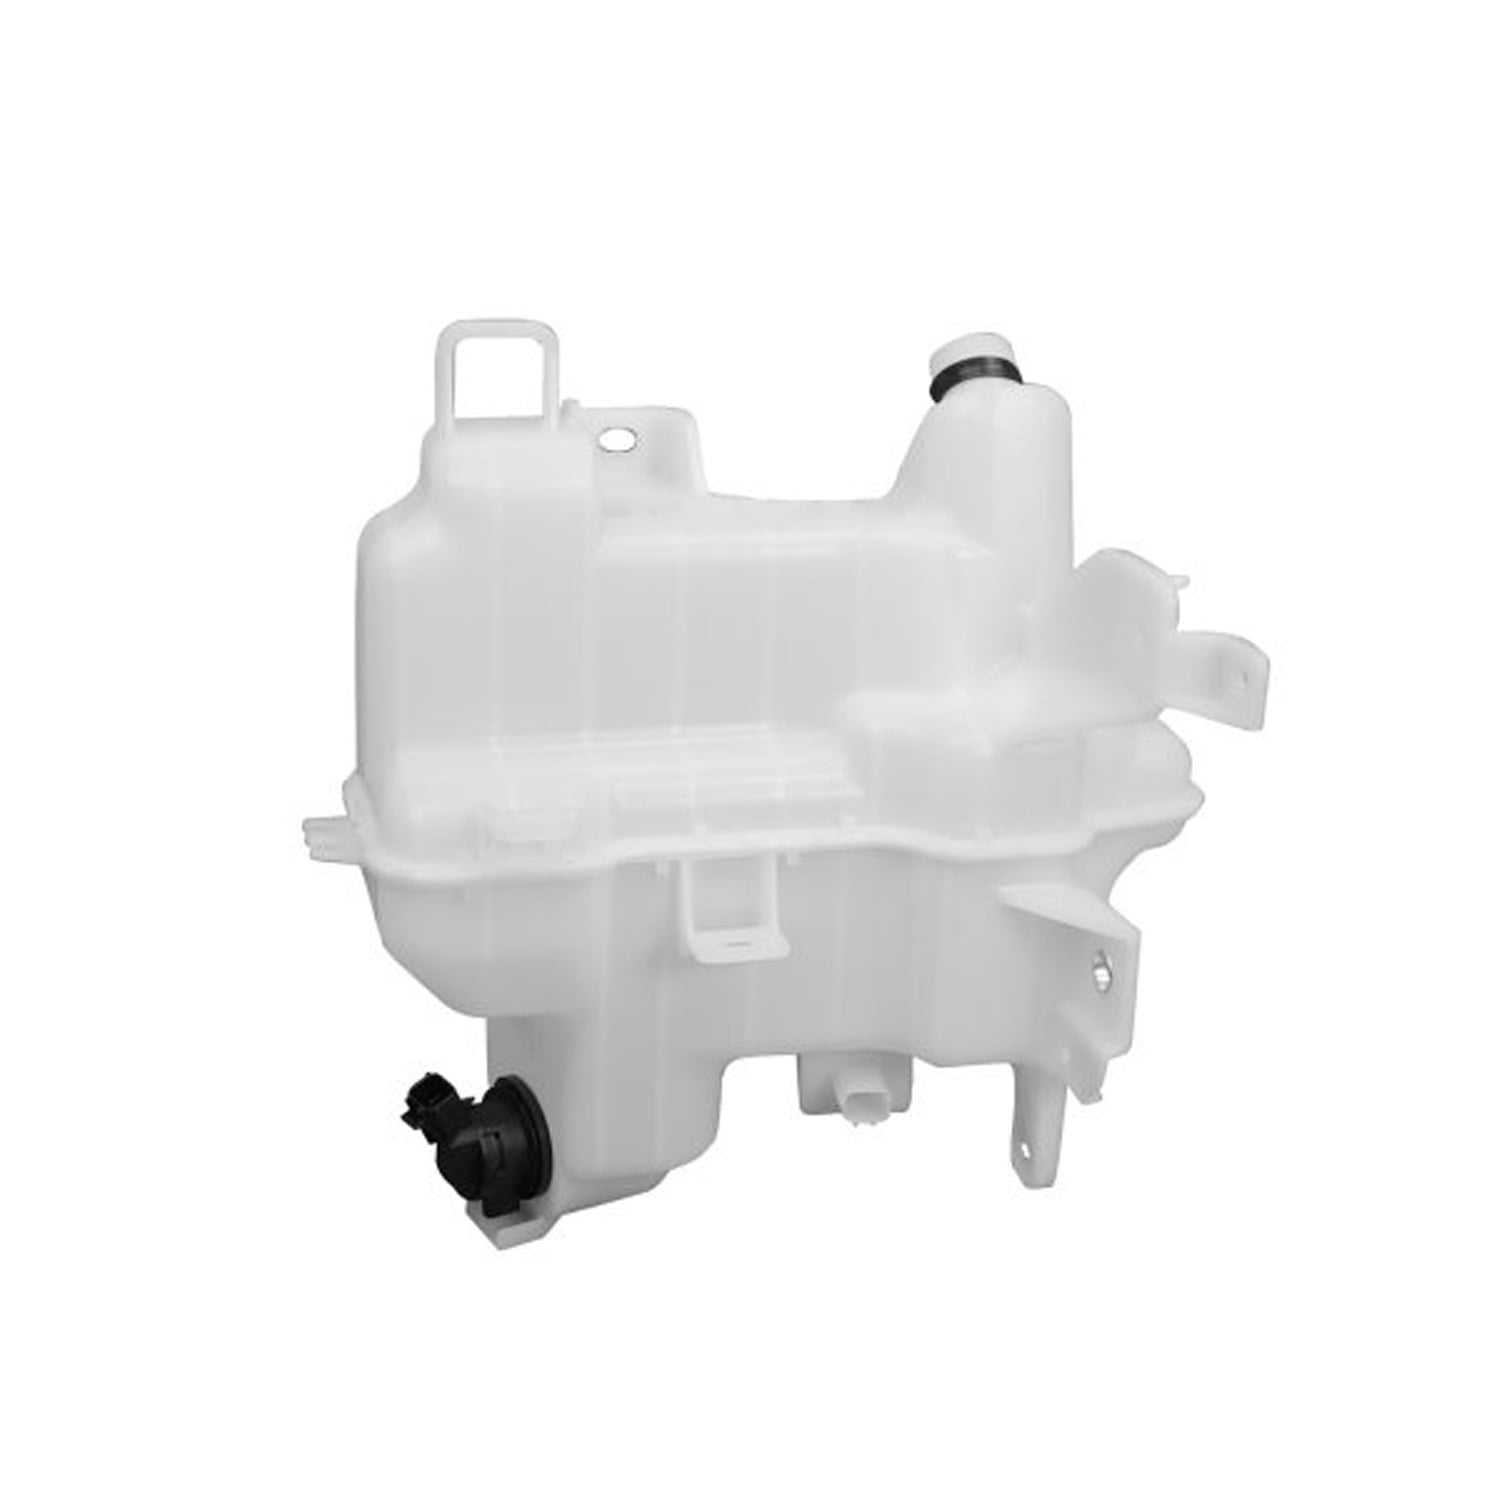 CPP Front Windshield Washer Tank Assembly for 01-03 Toyota RAV4 TO1288123 